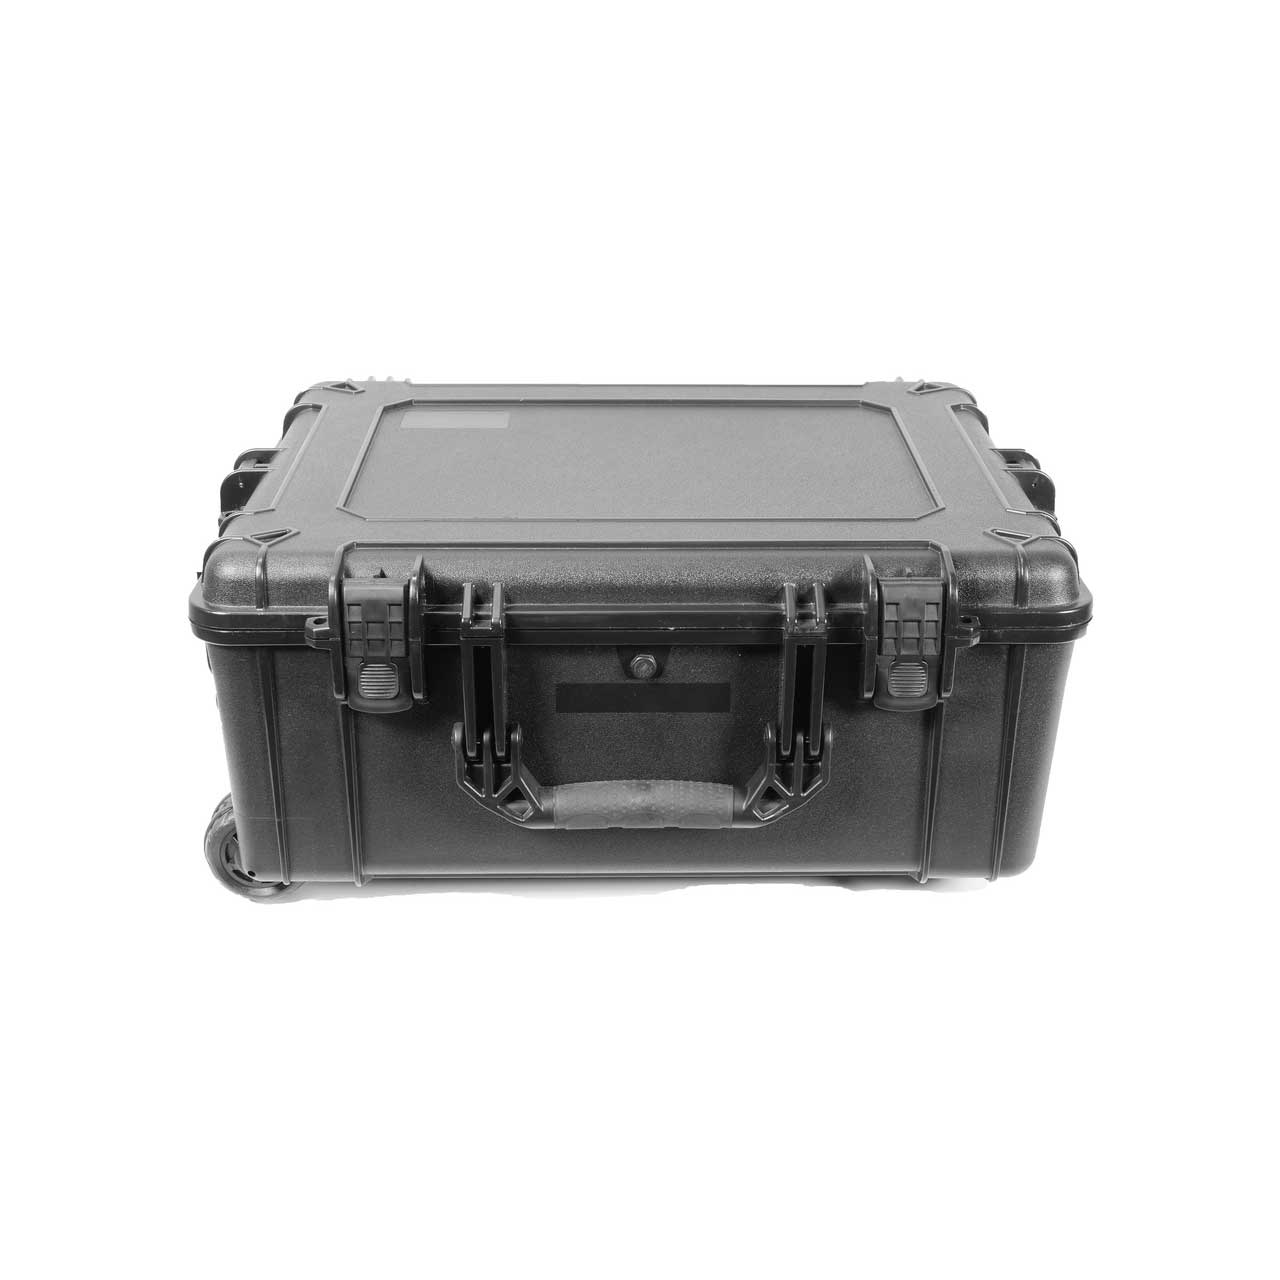 Prompter People CASE-HSPR Medium Size Travel Case for 12 Inch ...